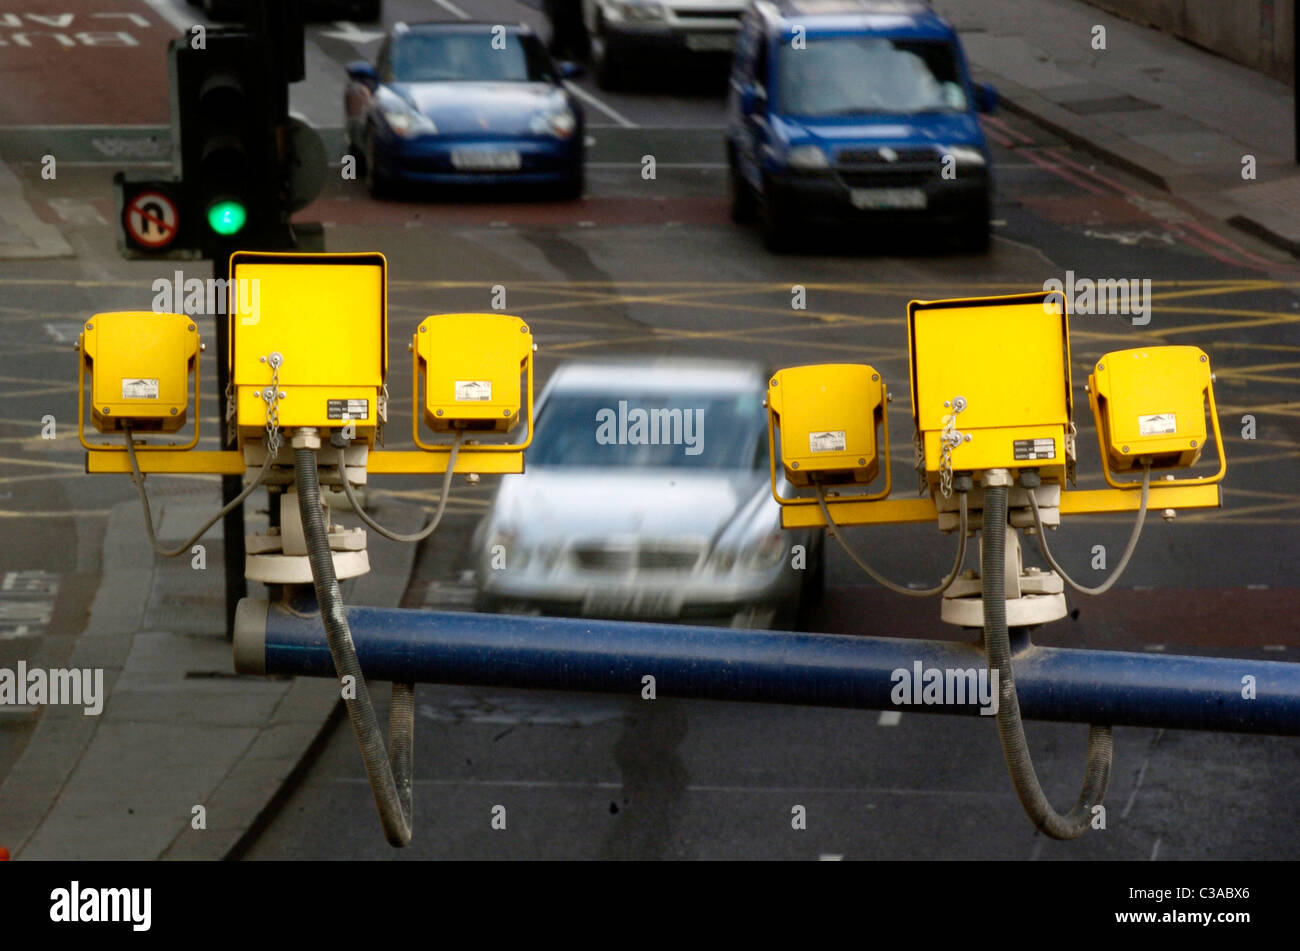 Speeding Fine High Resolution Stock Photography and Images - Alamy